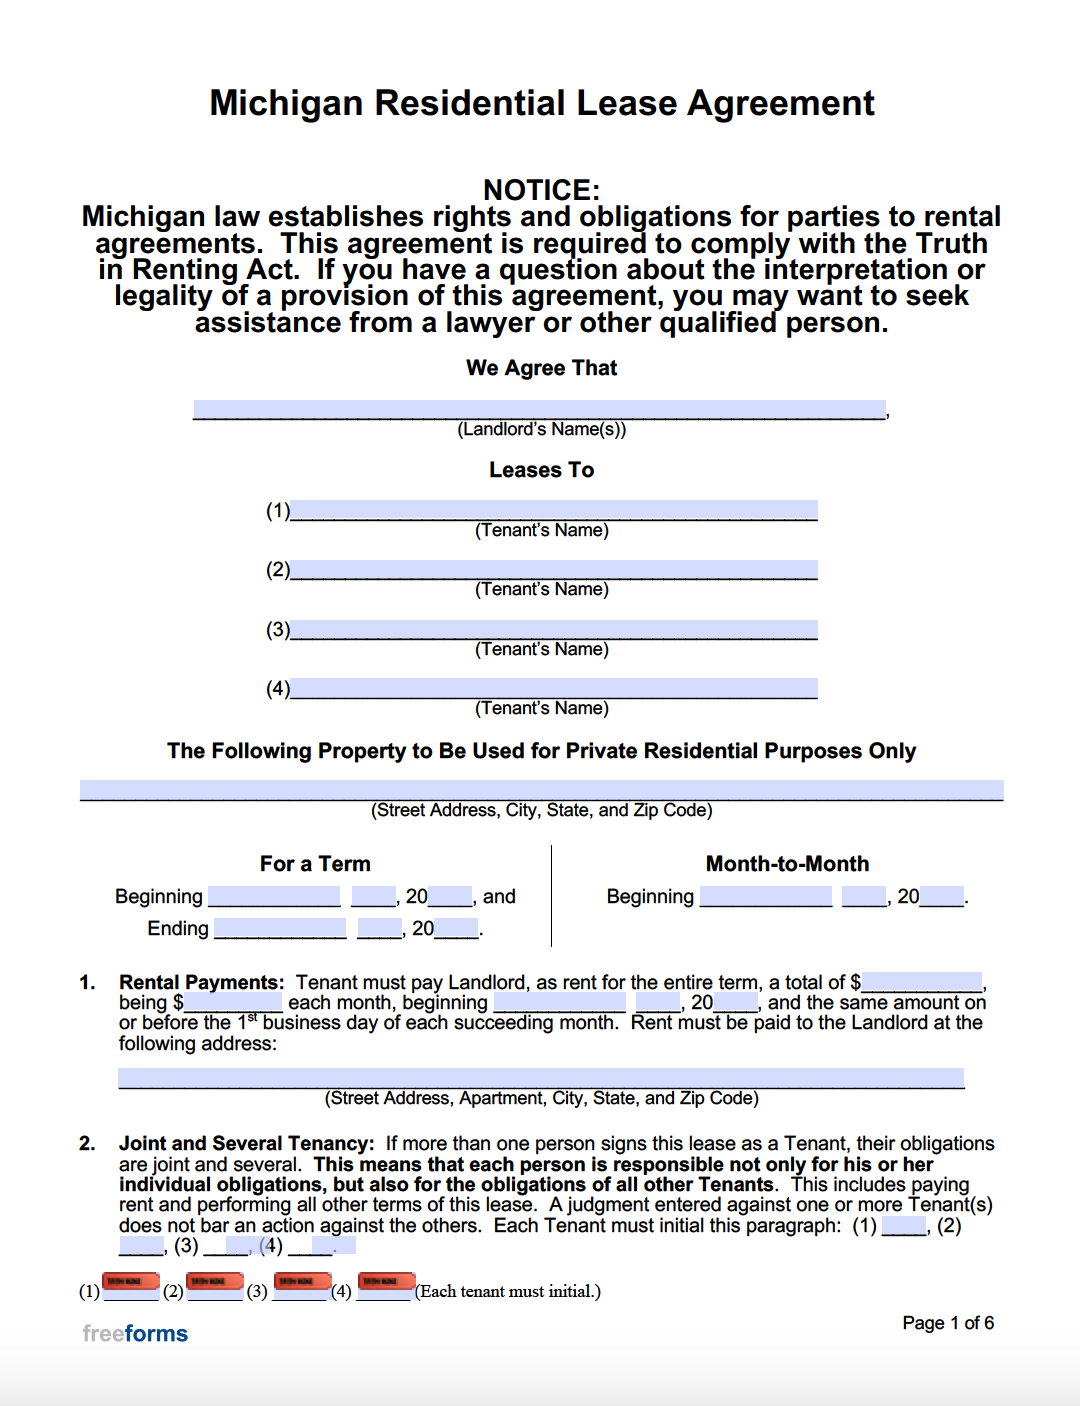 Standard Michigan Residential Lease Agreement Printable Form 